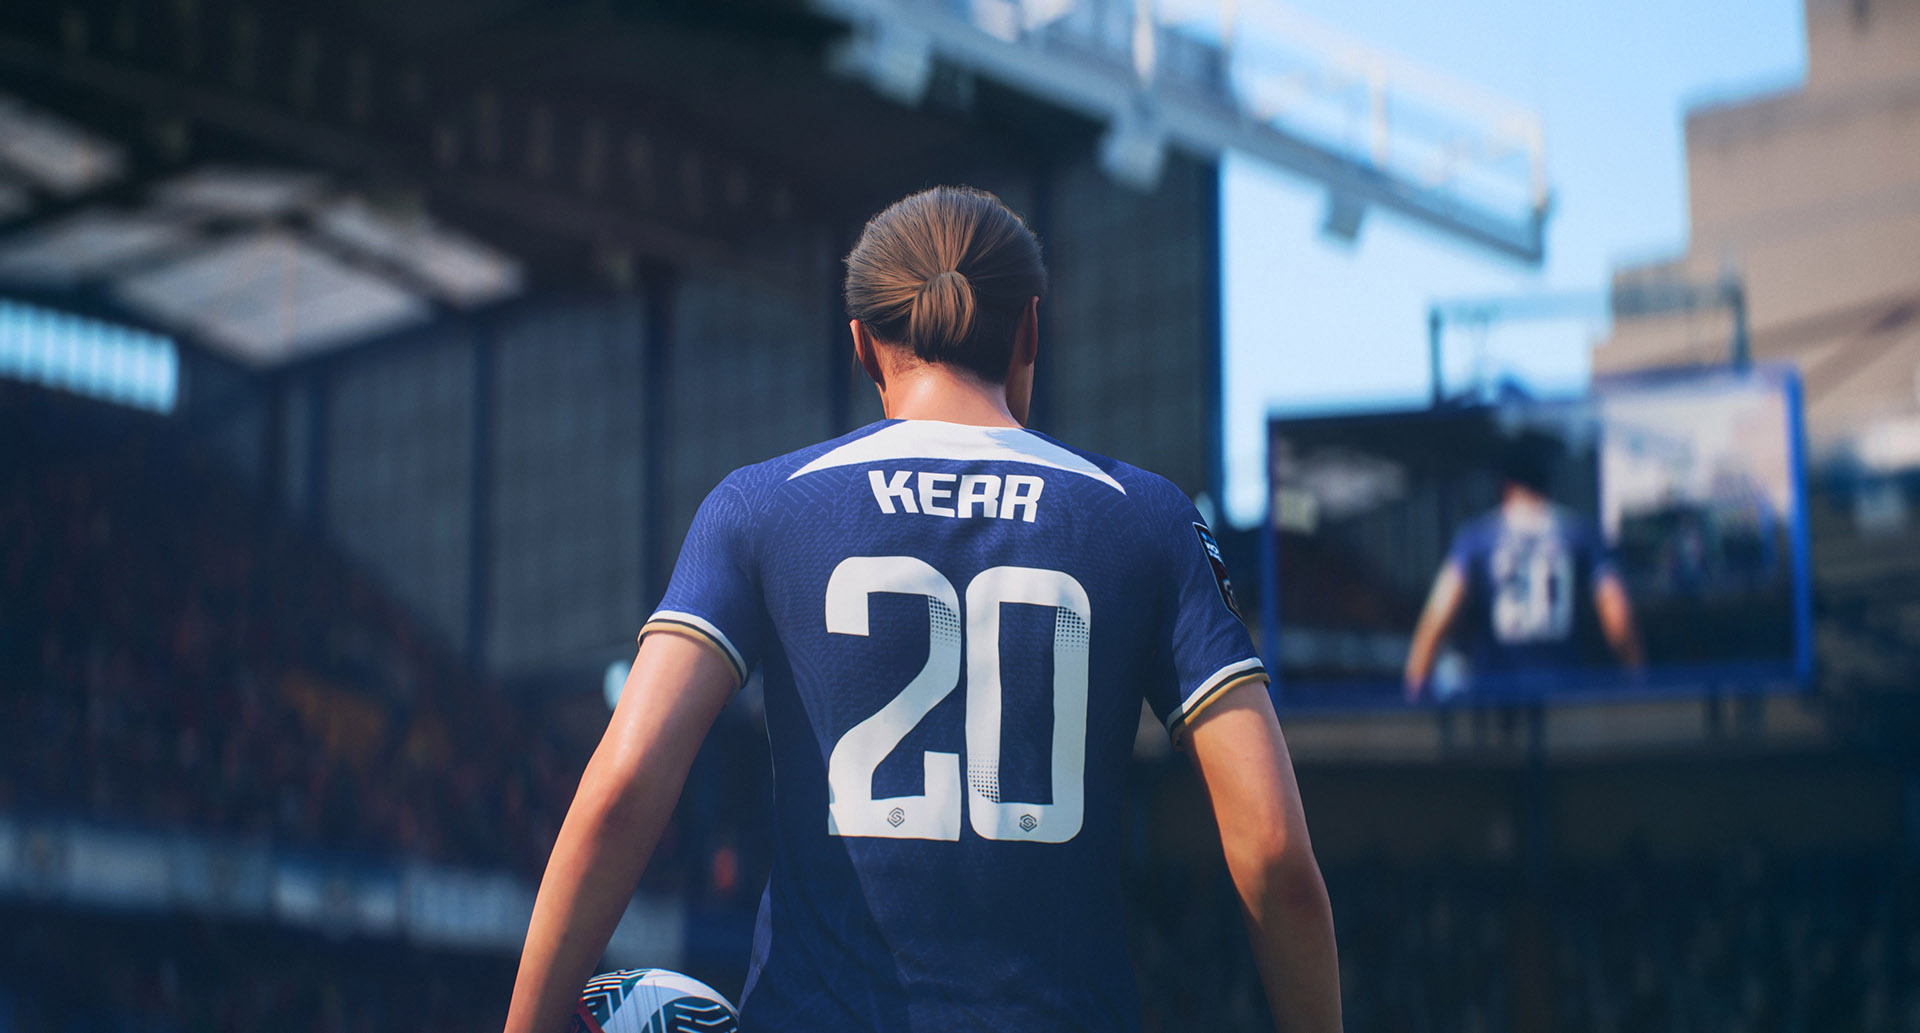 𝙄𝙉𝙁𝙄𝙉𝙄𝙏𝙔 𝙁𝘾 on X: EA Sports confirms the return of